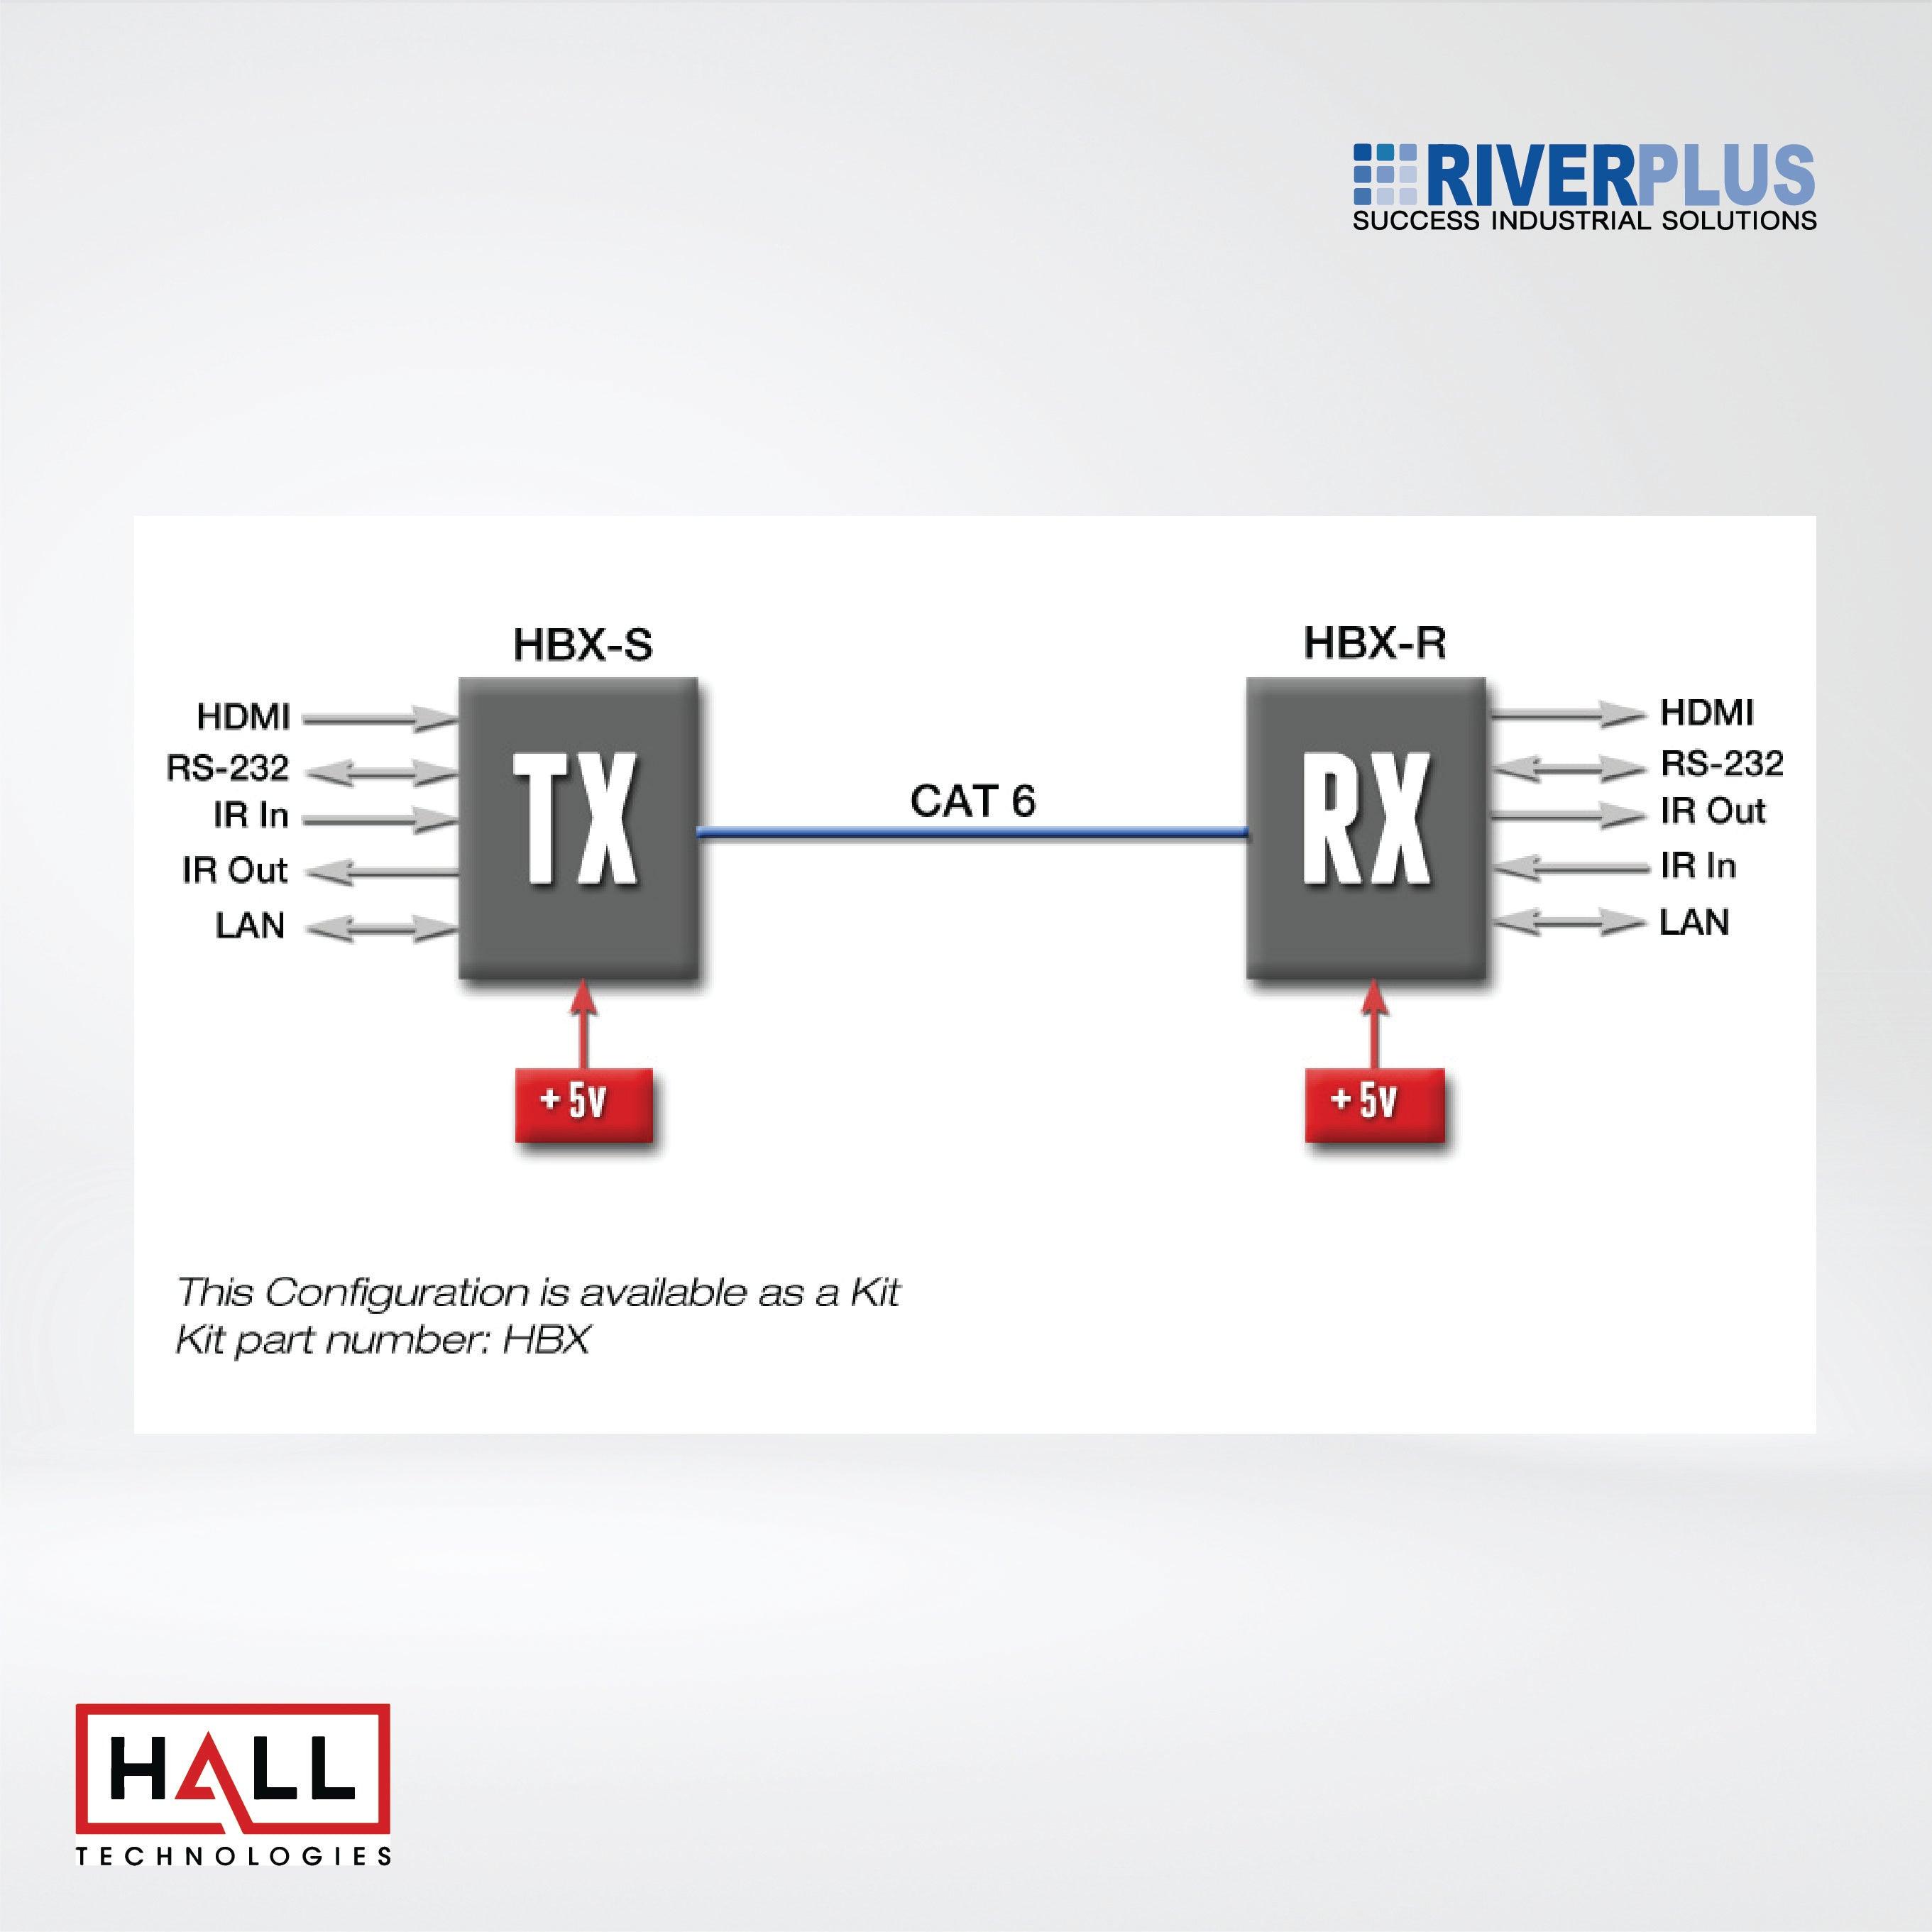 HBX-S HDMI Video Extender With Ultra-HD AV, IR, RS232 and Ethernet (Sender) - Riverplus